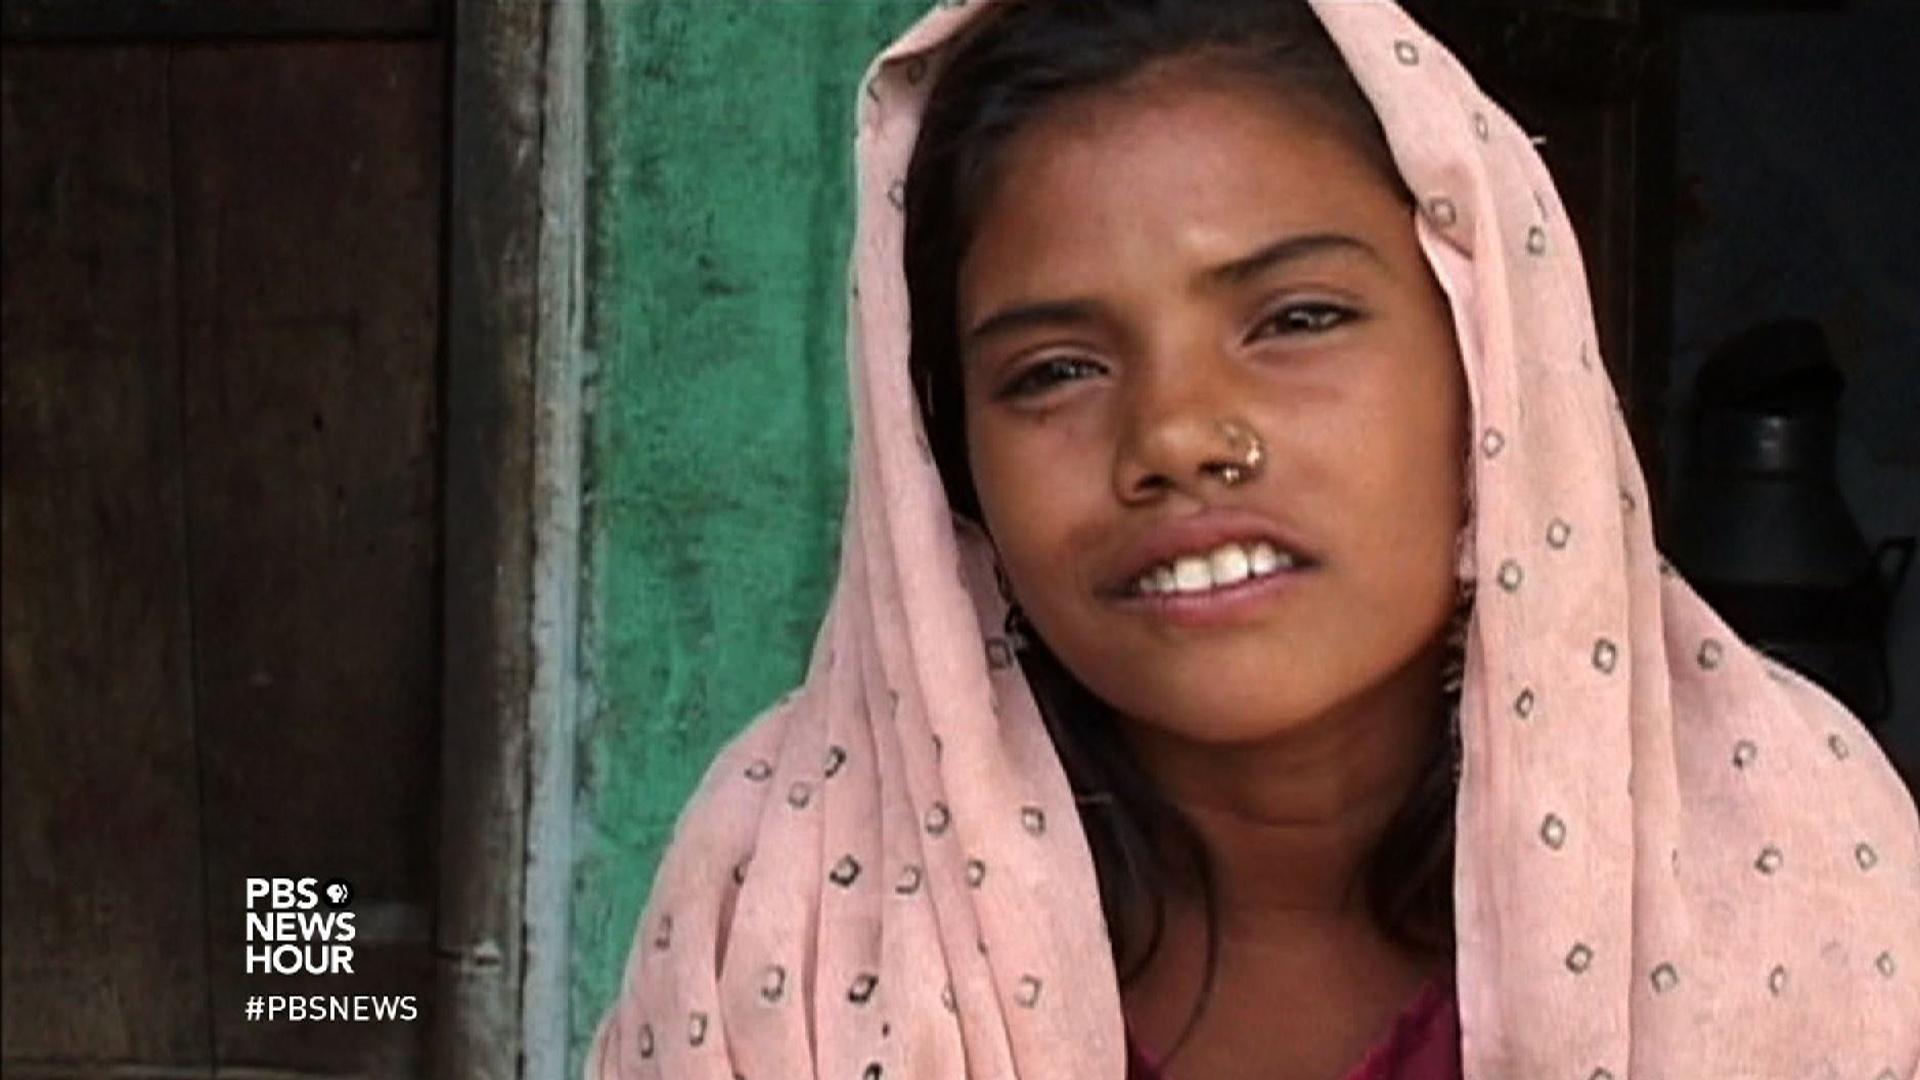 PBS NewsHour Why its hard for girls in rural India to stay in school Season 2015 photo pic image